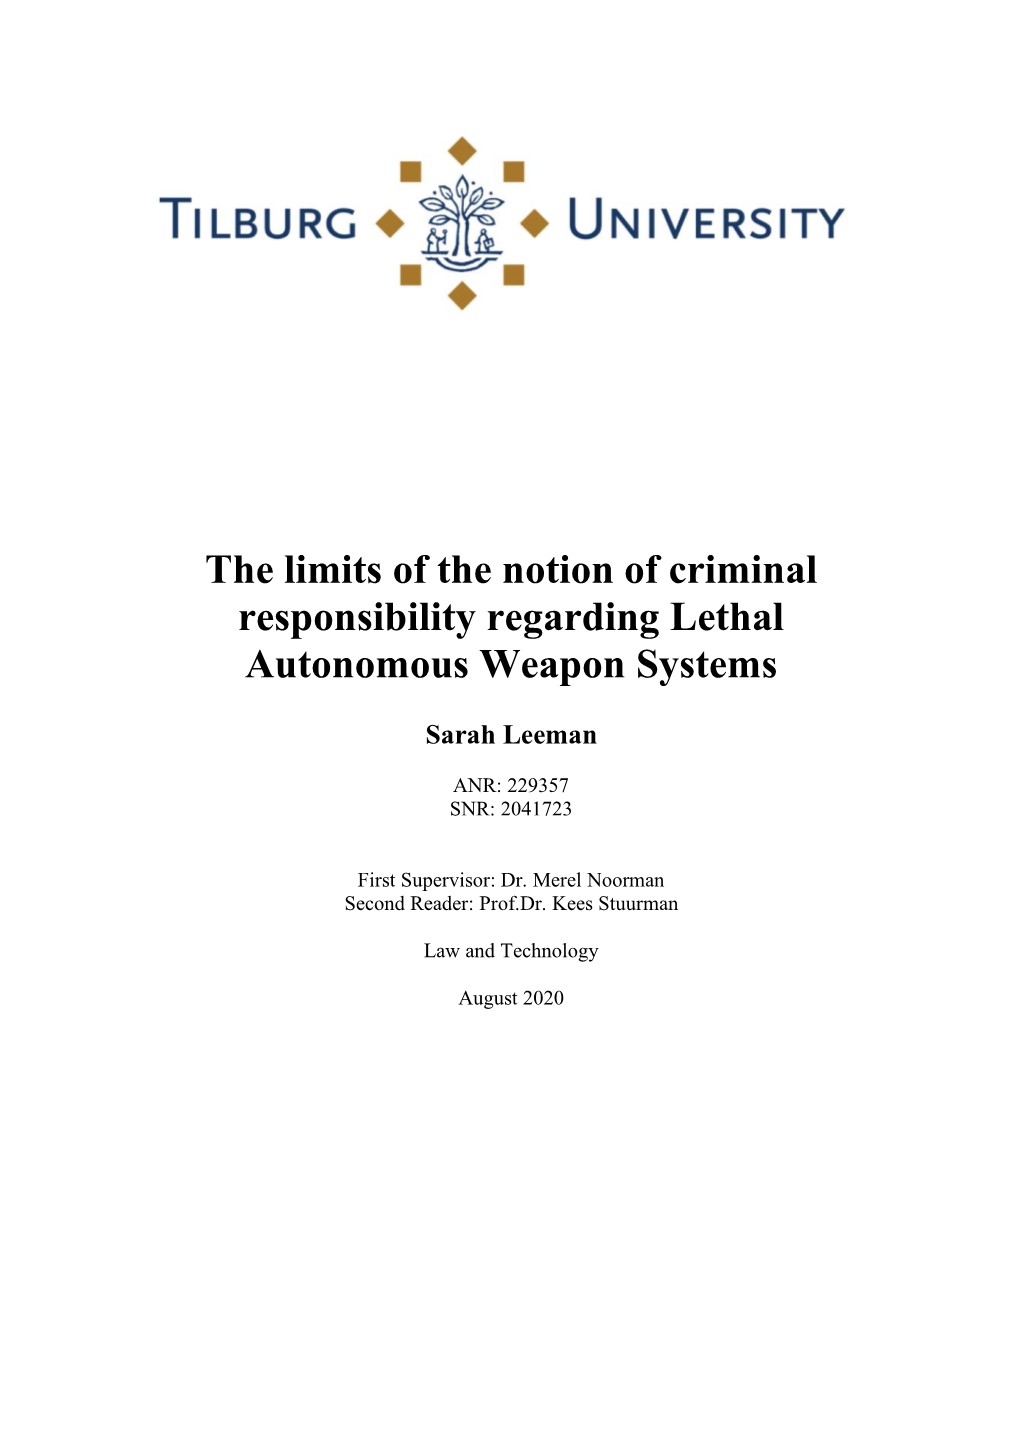 The Limits of the Notion of Criminal Responsibility Regarding Lethal Autonomous Weapon Systems